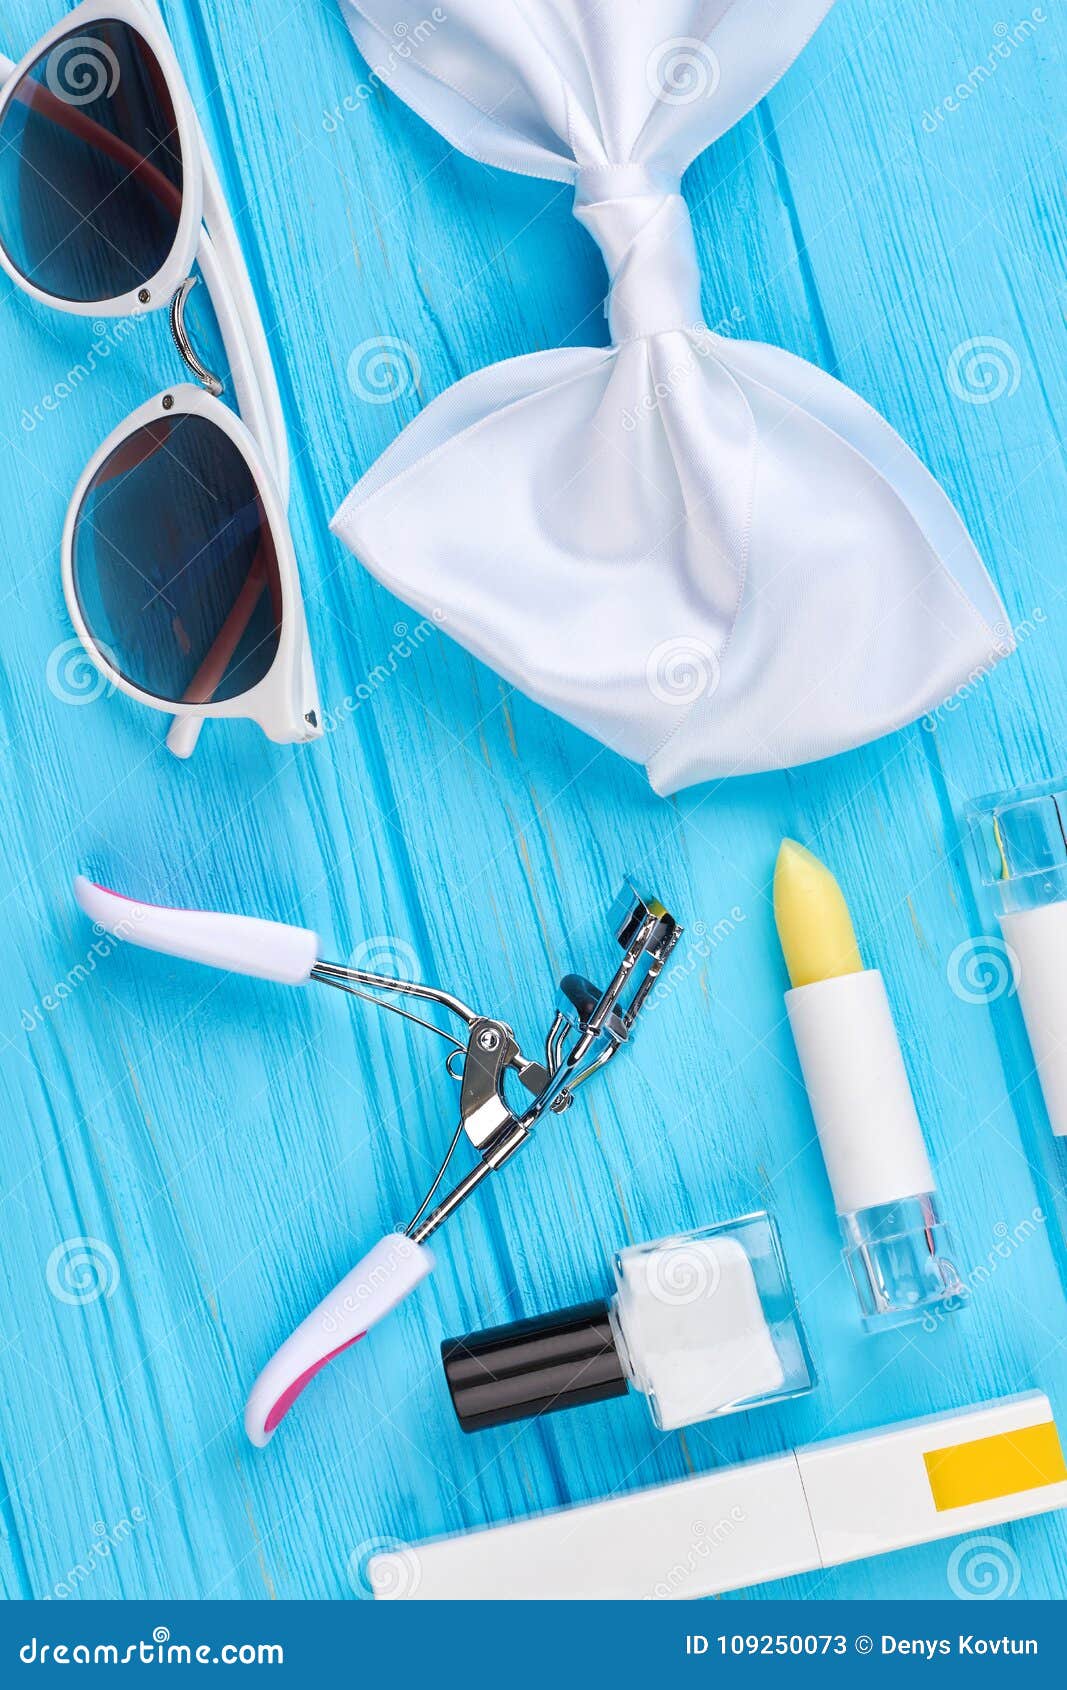 Cosmetics Items and Fashion Accessories Set. Stock Image - Image of ...